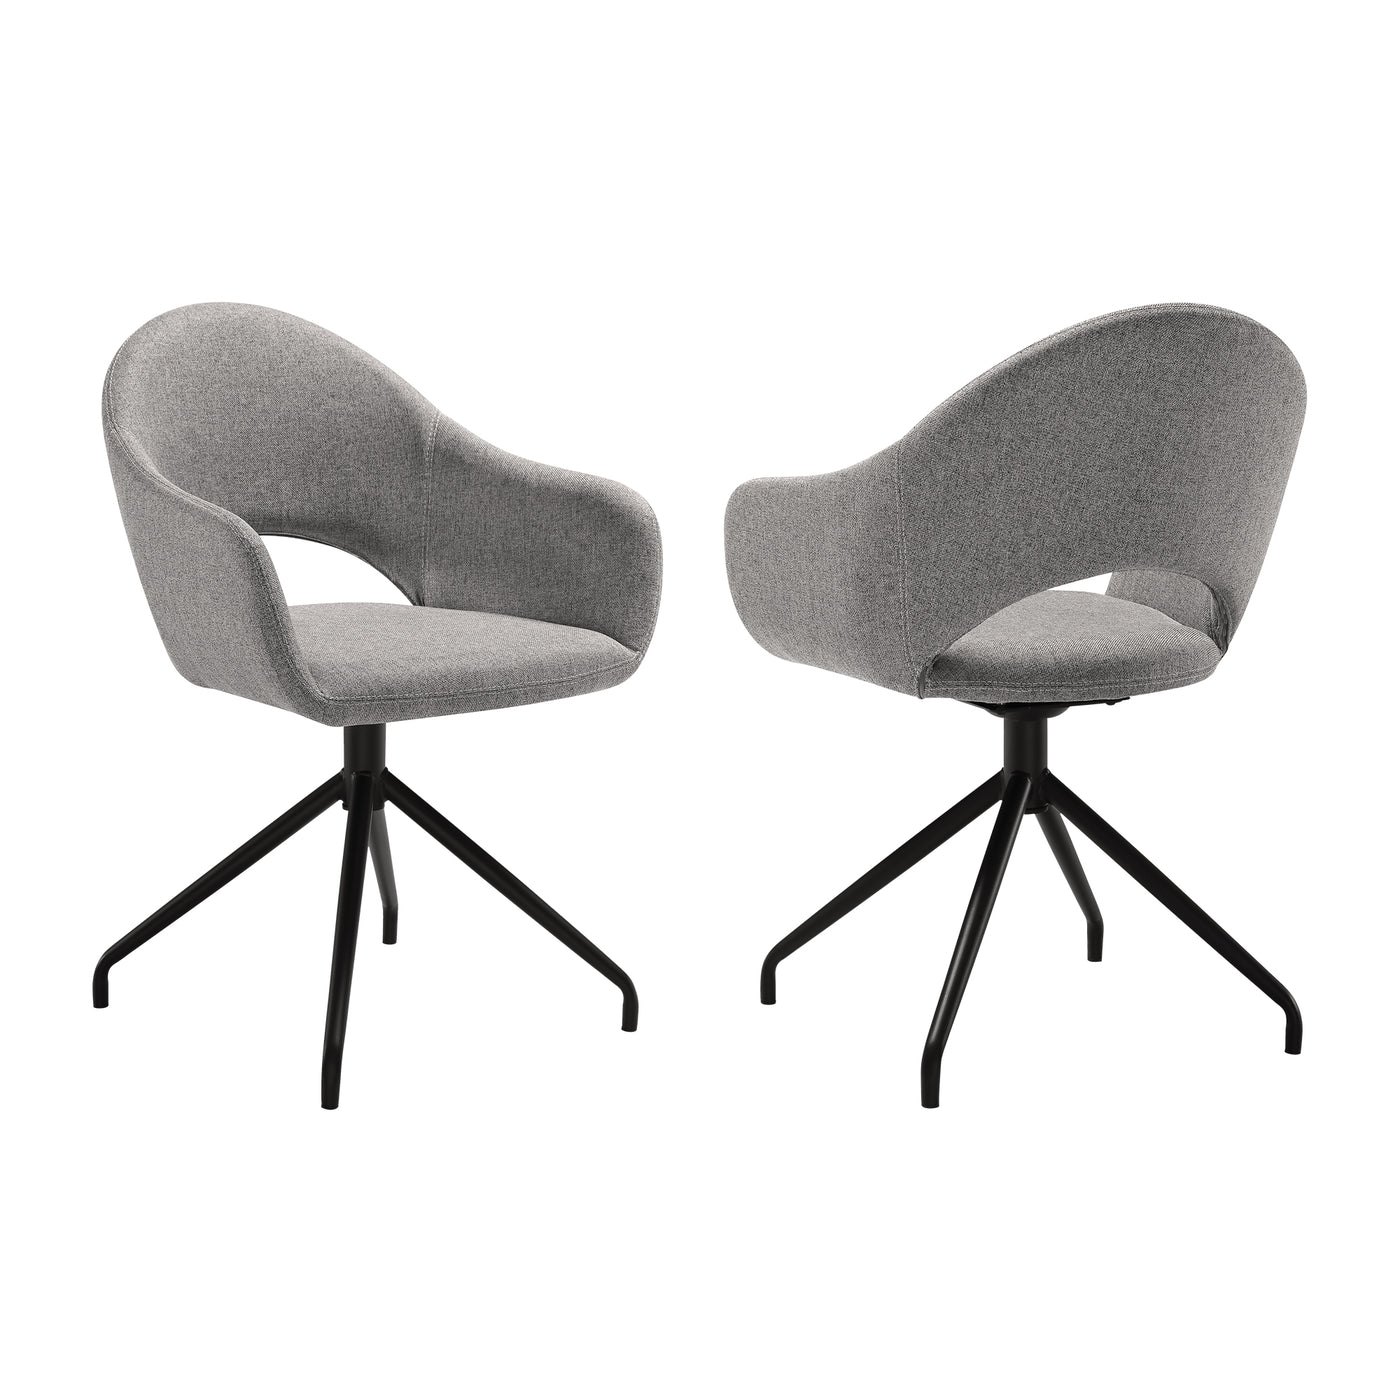 Pria Swivel Upholstered Dining Chair Set of 2